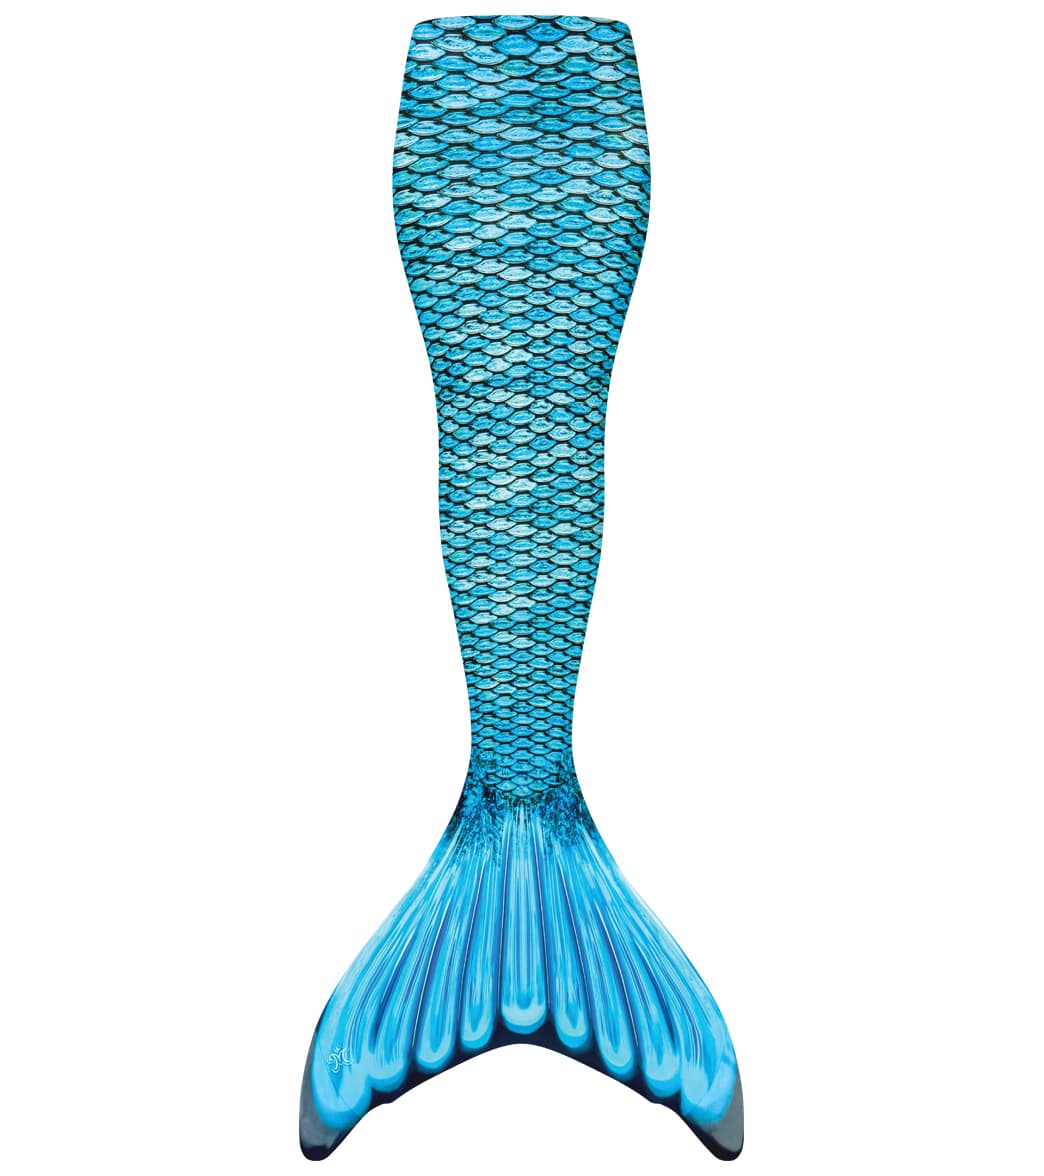 Fin Fun Tidal Teal Mermaid Tail & Monofin Youth/Adult - Youth Large 10 - Swimoutlet.com